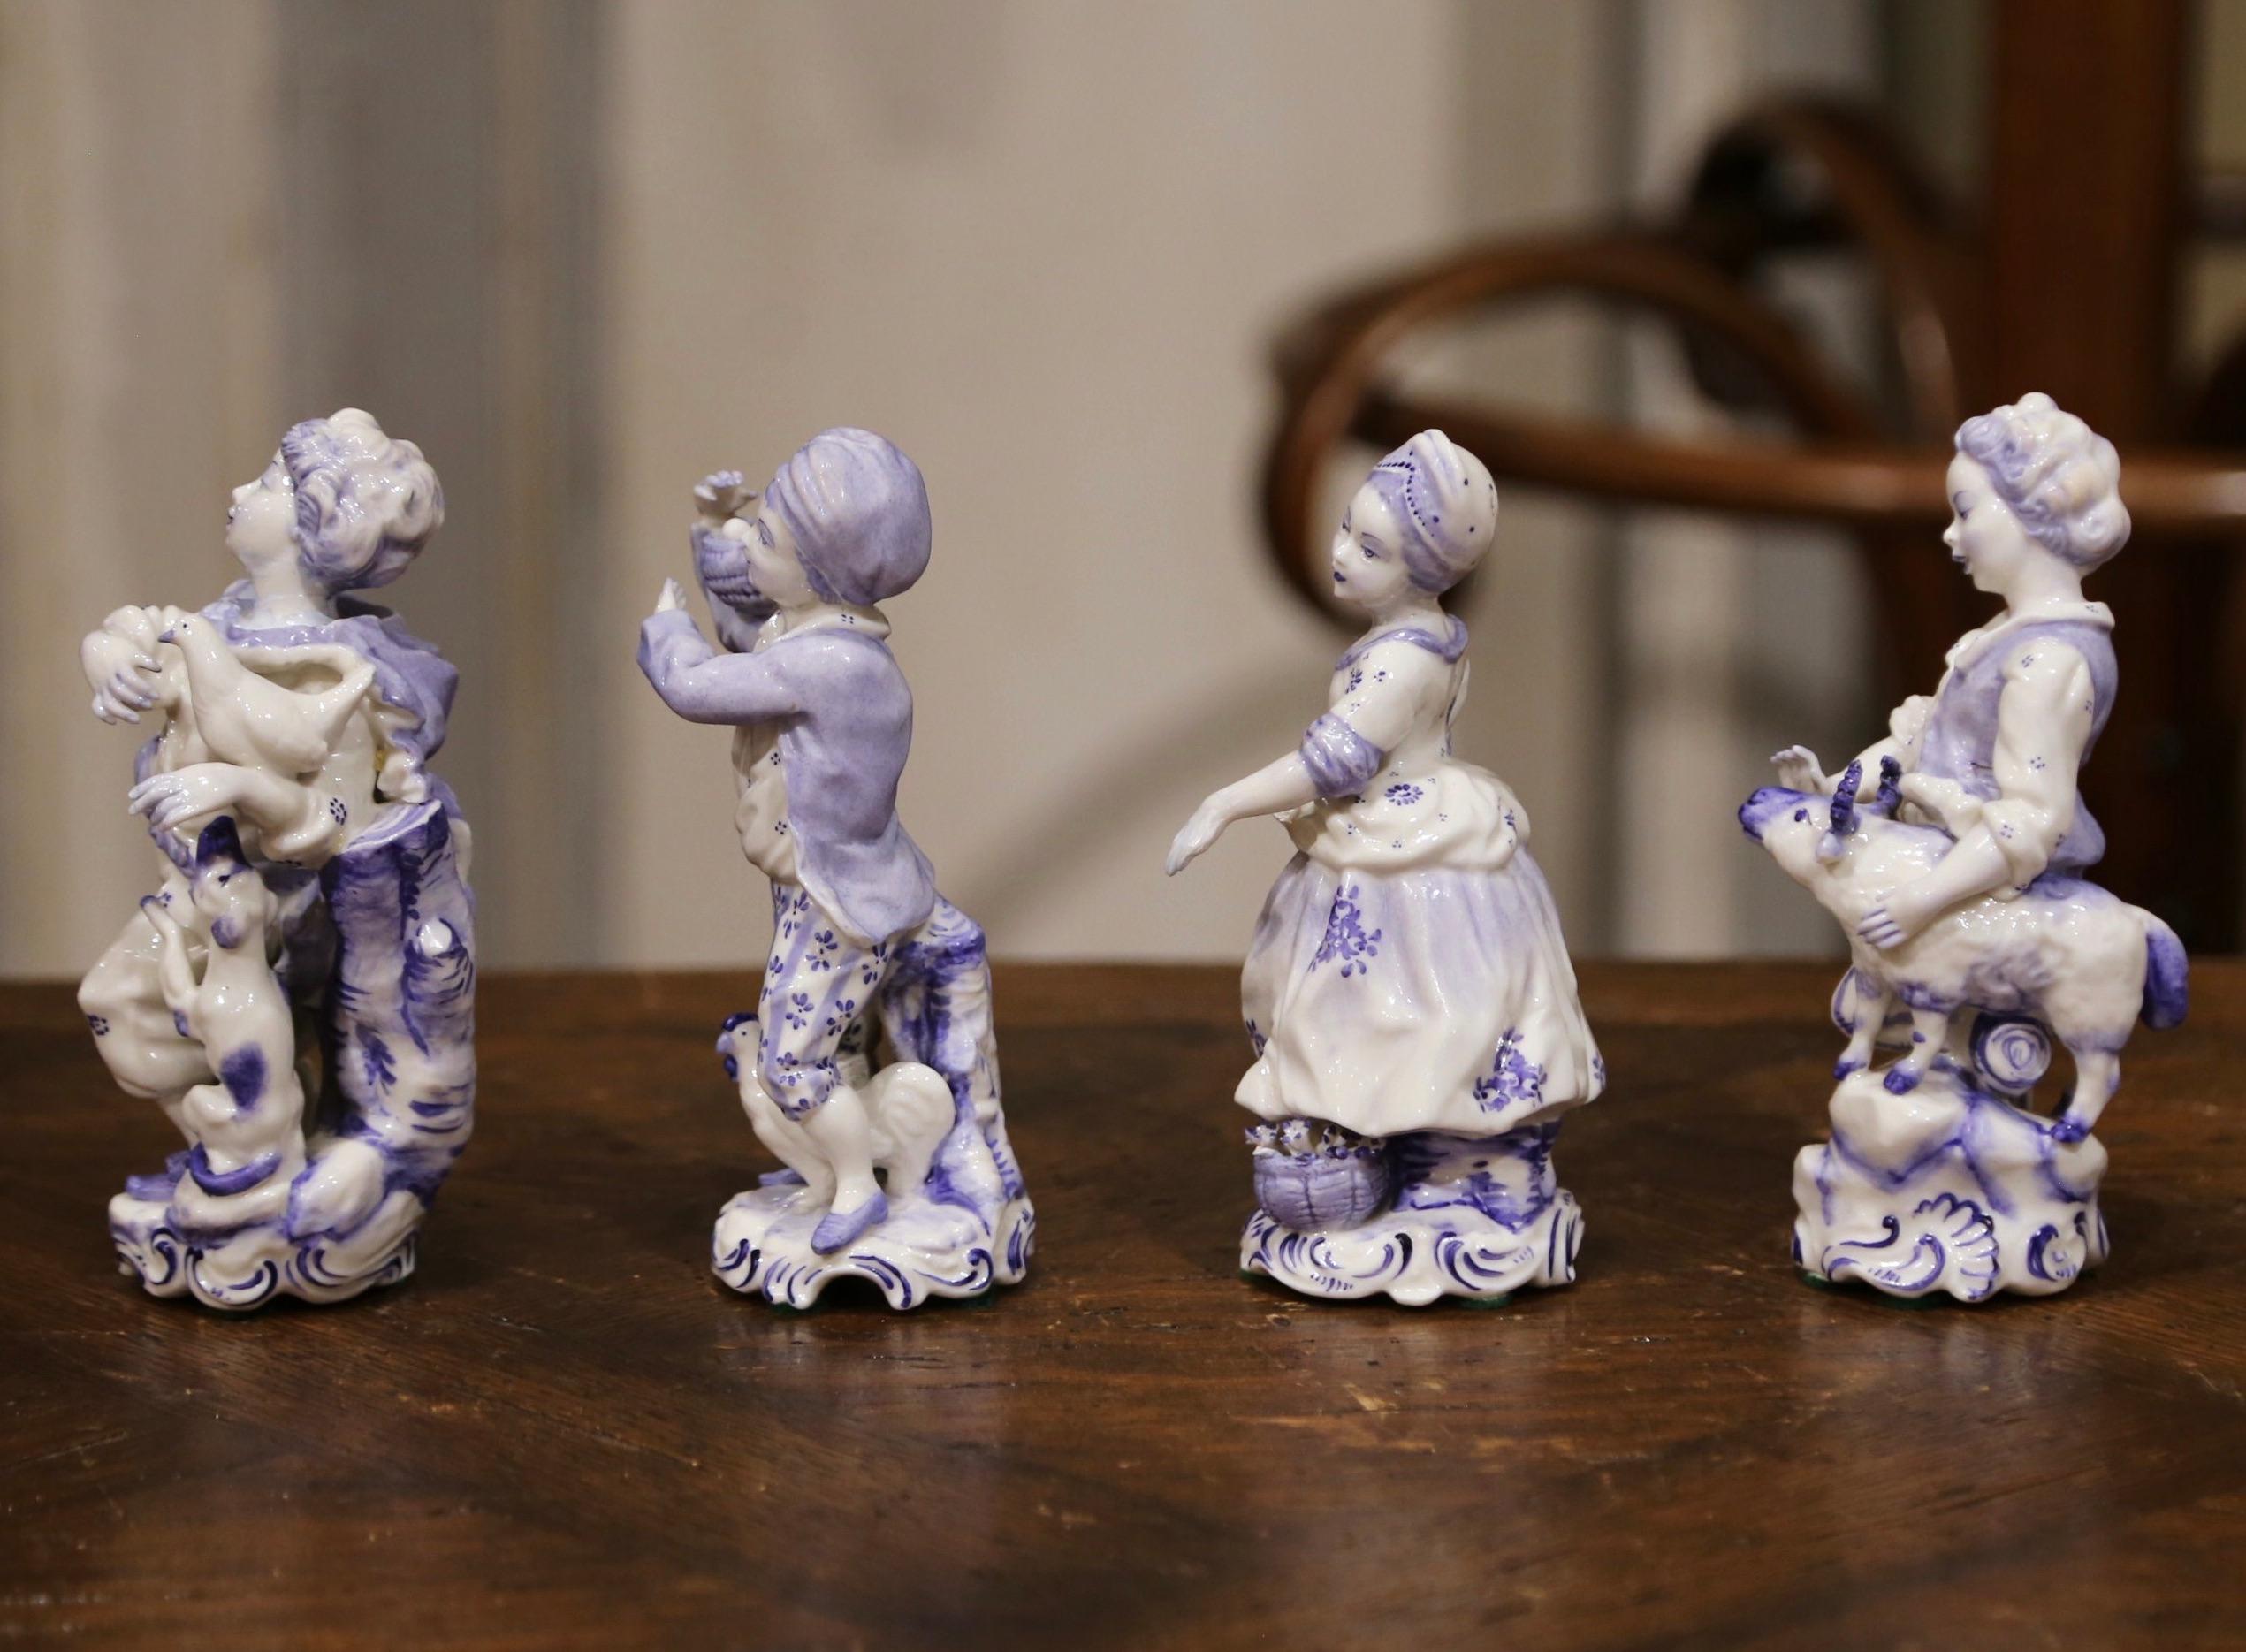 Crafted in Holland circa 1920, the four faience sculptures depict peasant young beauties in traditional clothing. One woman has a duck and dog, another holding eggs with chicken, another with a goat and the last one with a basket of flowers. The